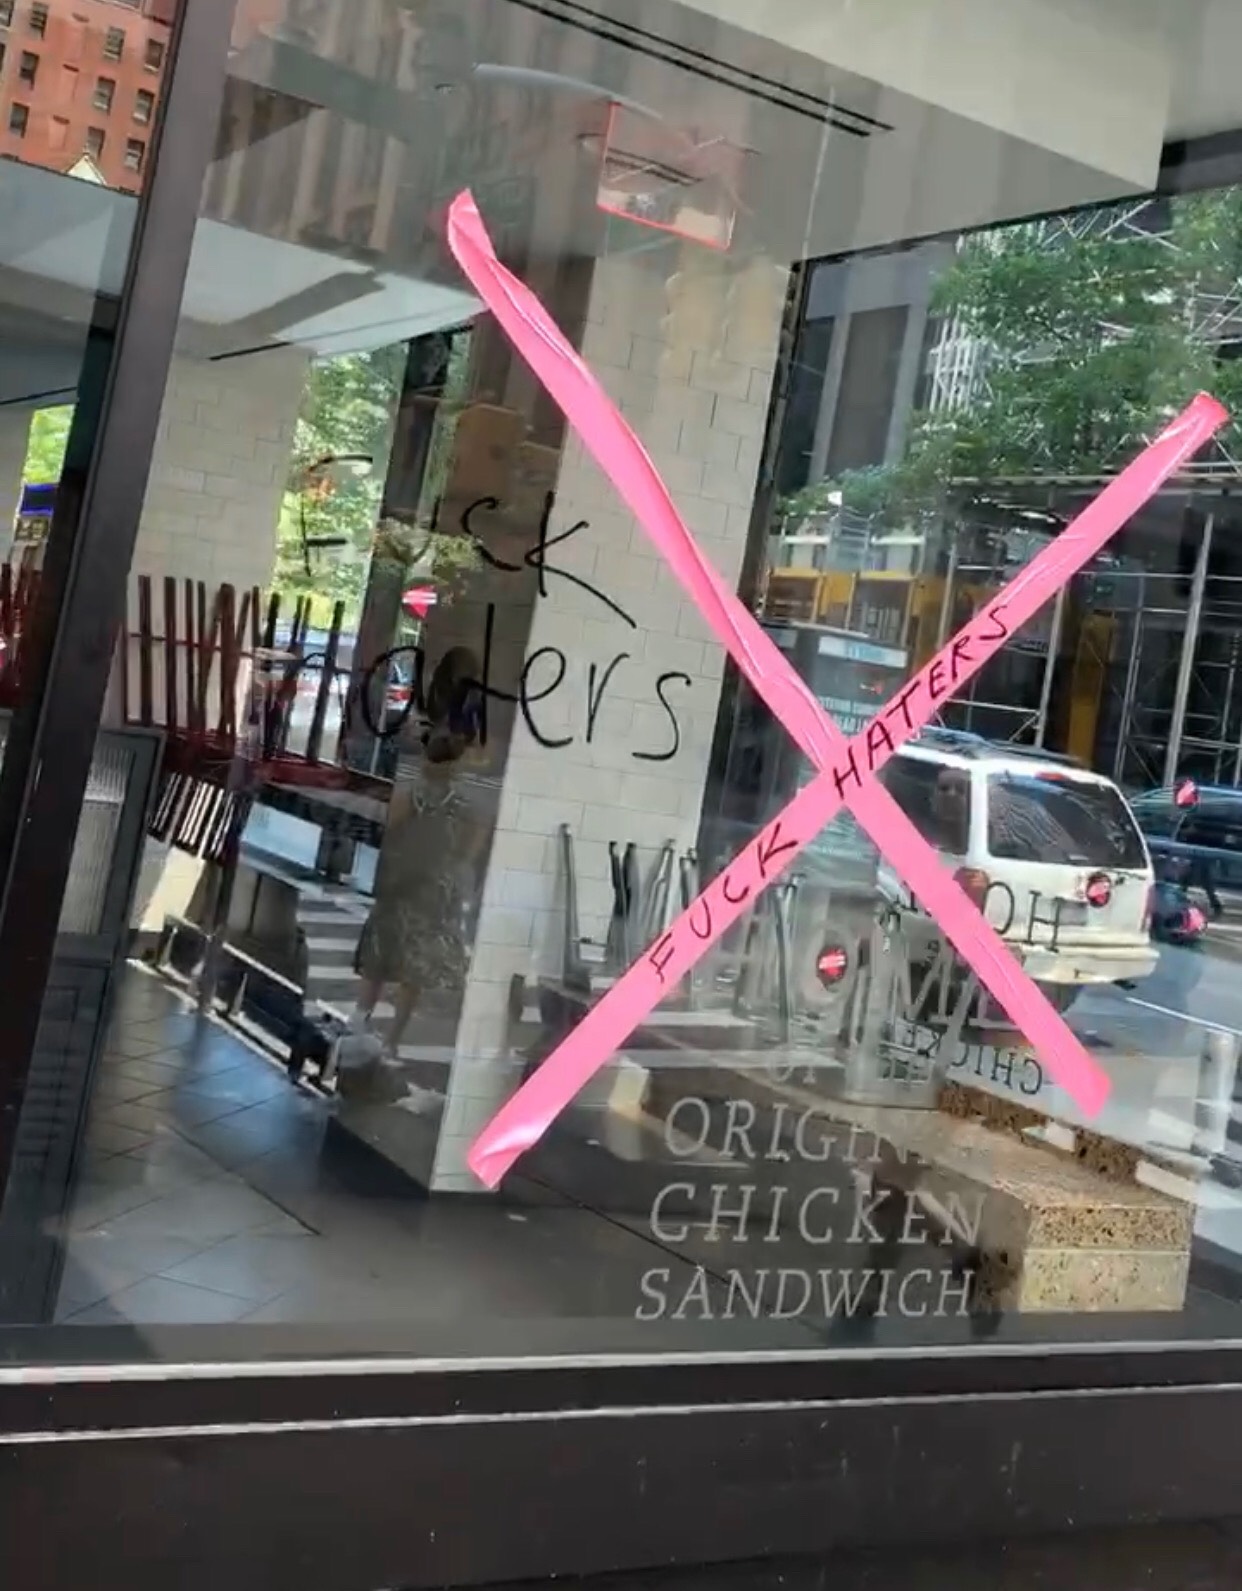 Manhattan Chick-Fil-A vandalized during Pride. Photo provided to the Daily Caller